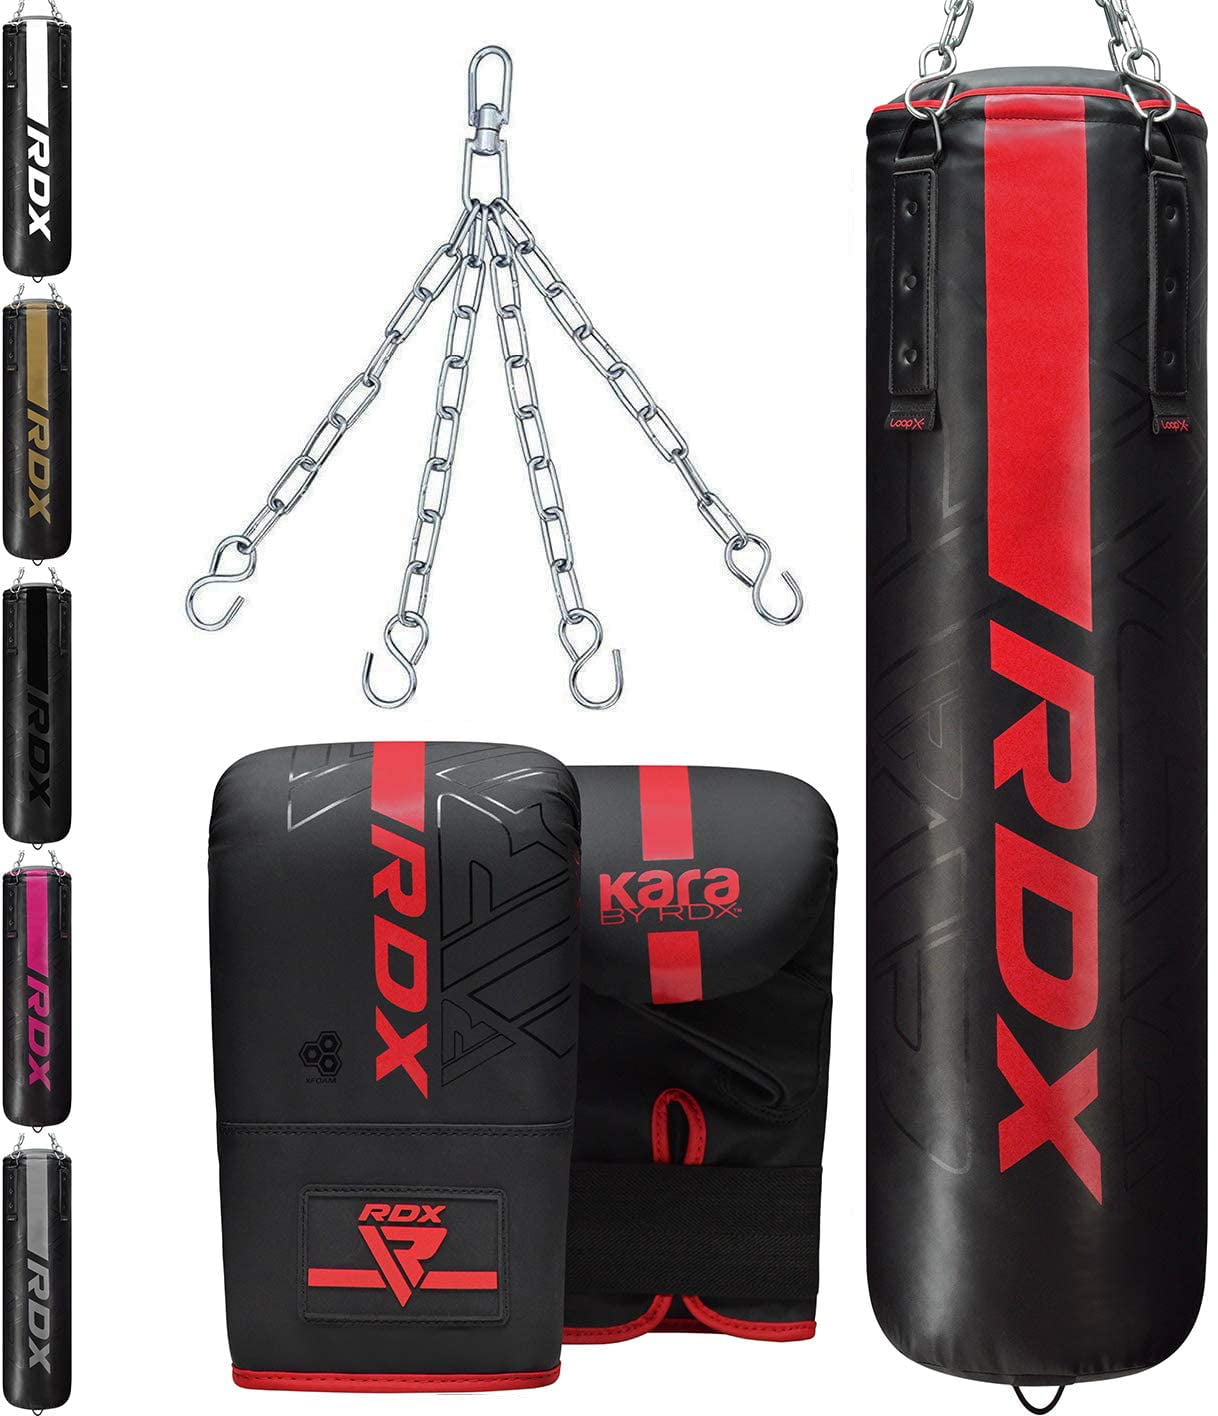 KARA Patent Pending RDX 17PC Punch Bag 5ft 4ft Heavy Filled Set Kickboxing Boxing MMA Muay Thai Karate Training Workout Non Tear Maya Hide Leather Adult Bag with Wall Bracket Punching Gloves Chain